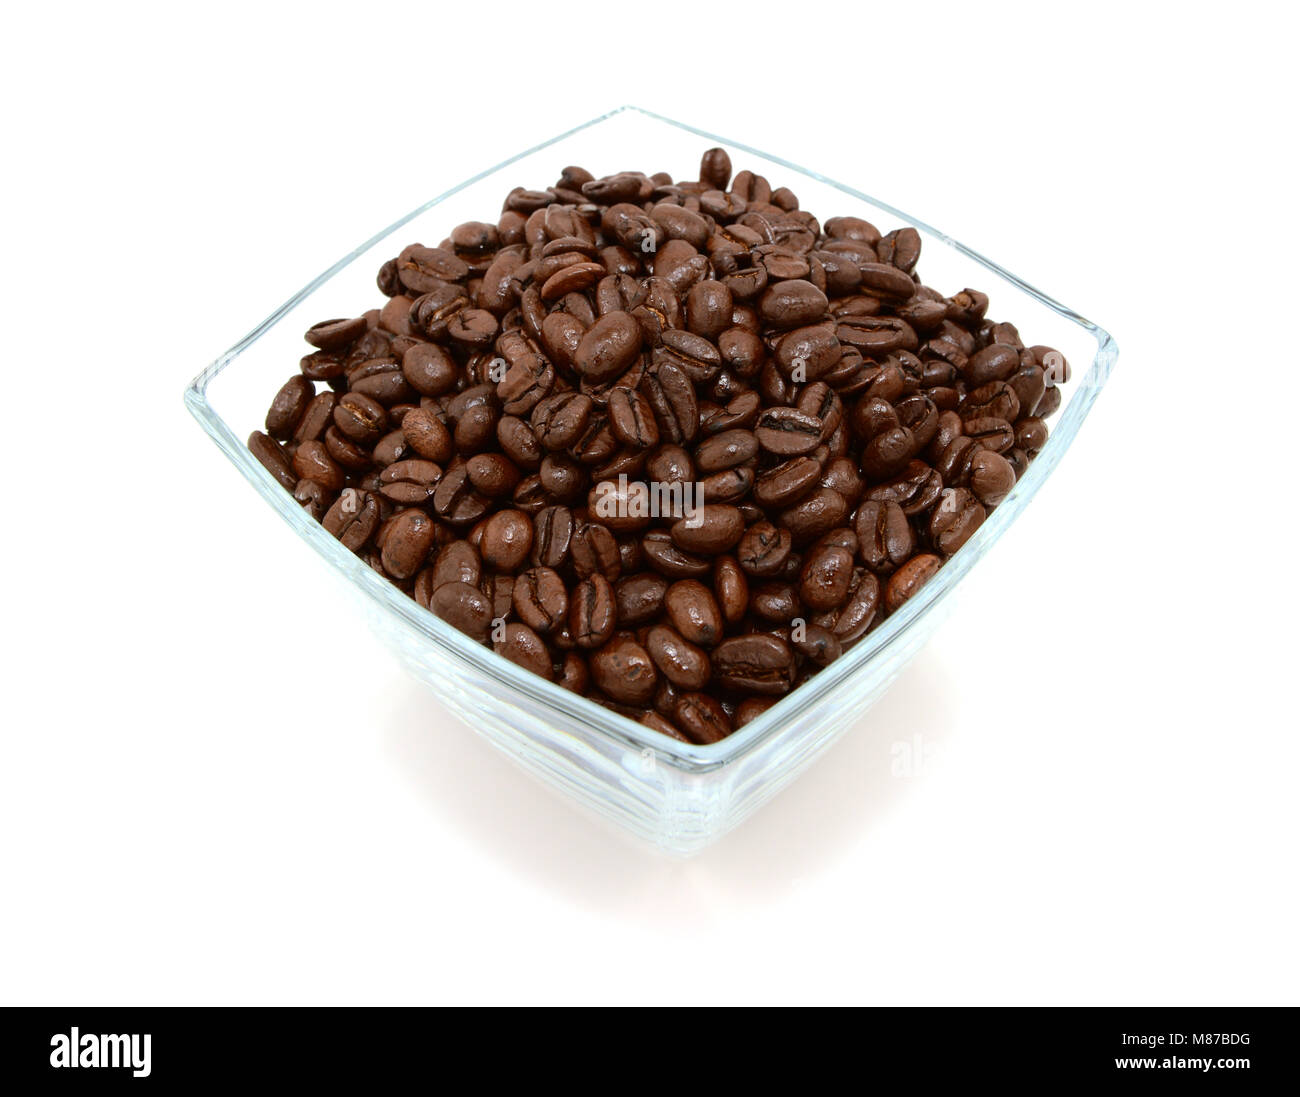 Glass bowl filled to the brim with dark roasted coffee beans, on a white background Stock Photo